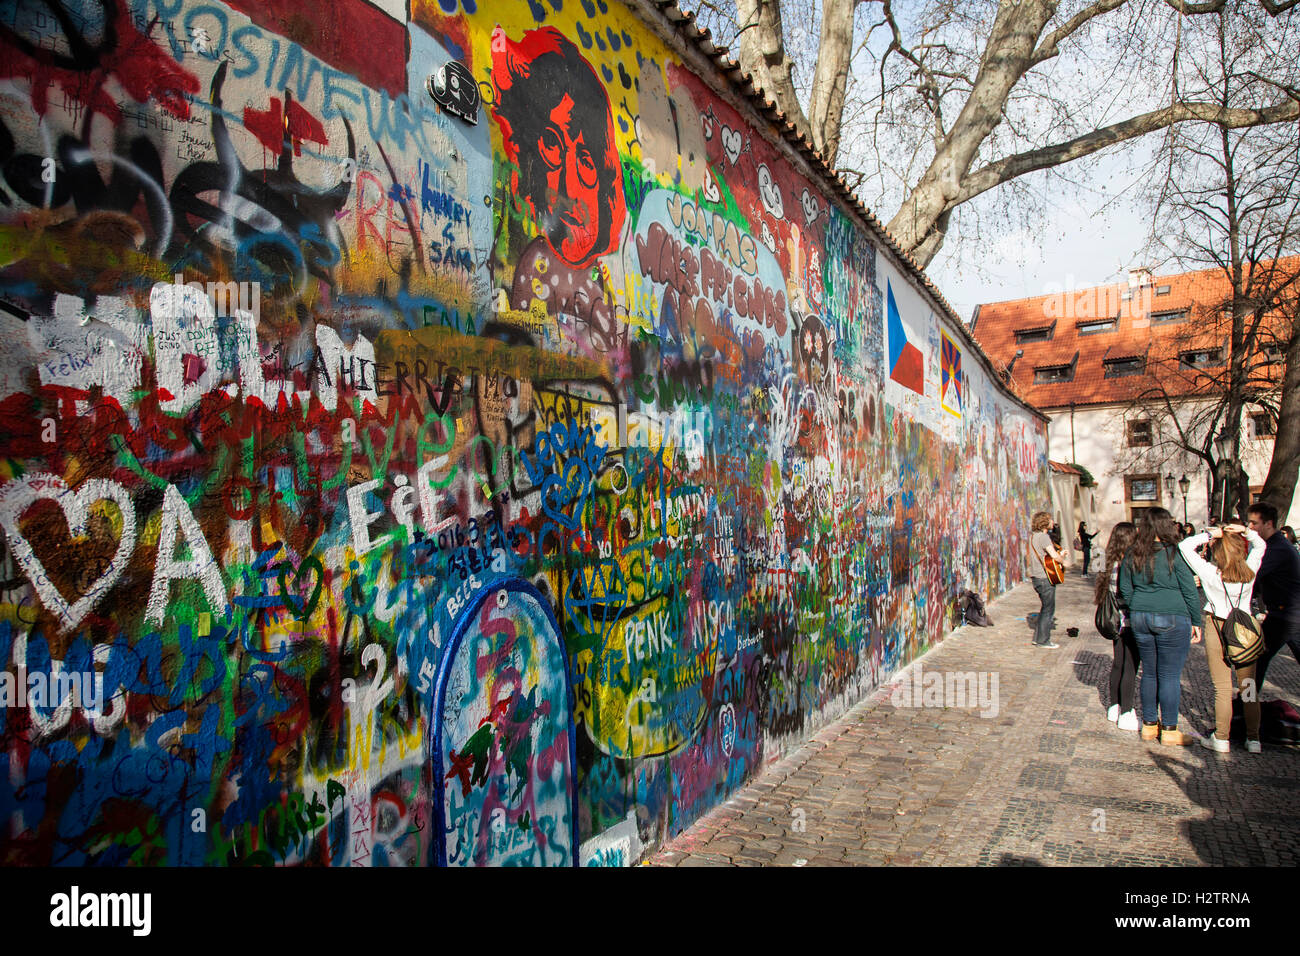 John Lennon wall in Prague. After his murder in 1980 it was a political graffiti protest by the young Czech. Stock Photo